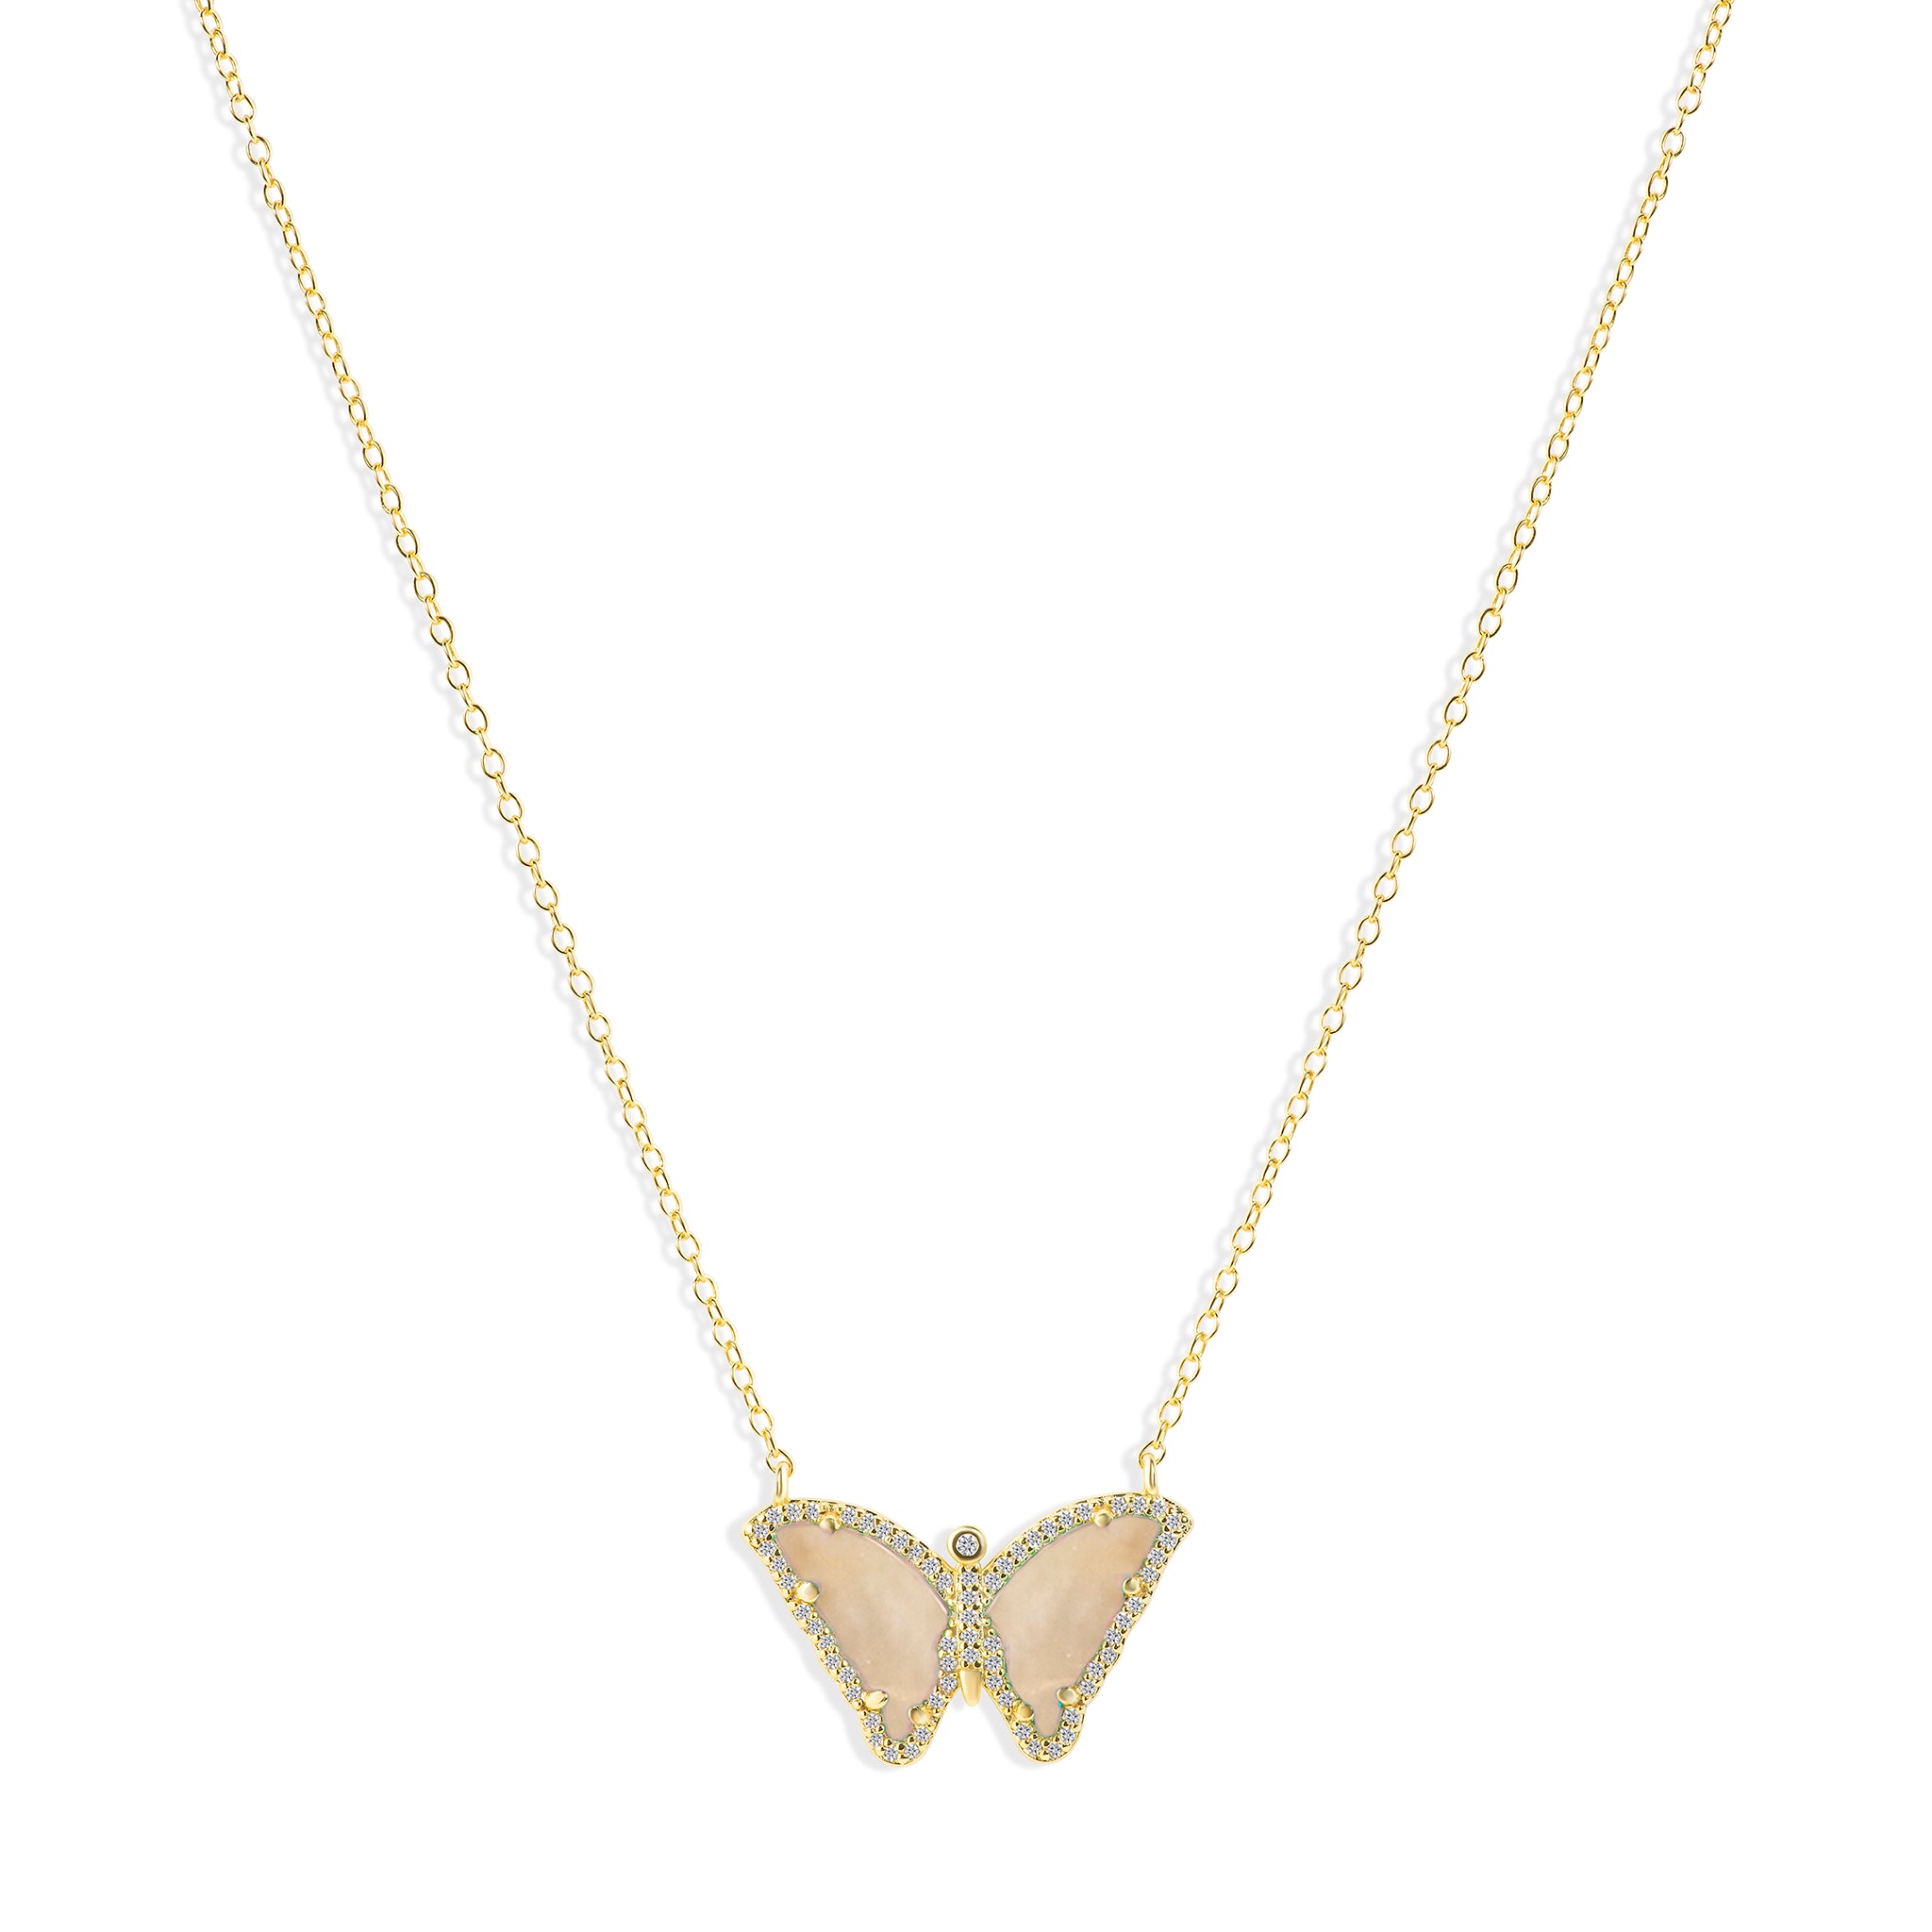 The coveted Cream Satin & Lira Clasp Necklace. Selling out fast